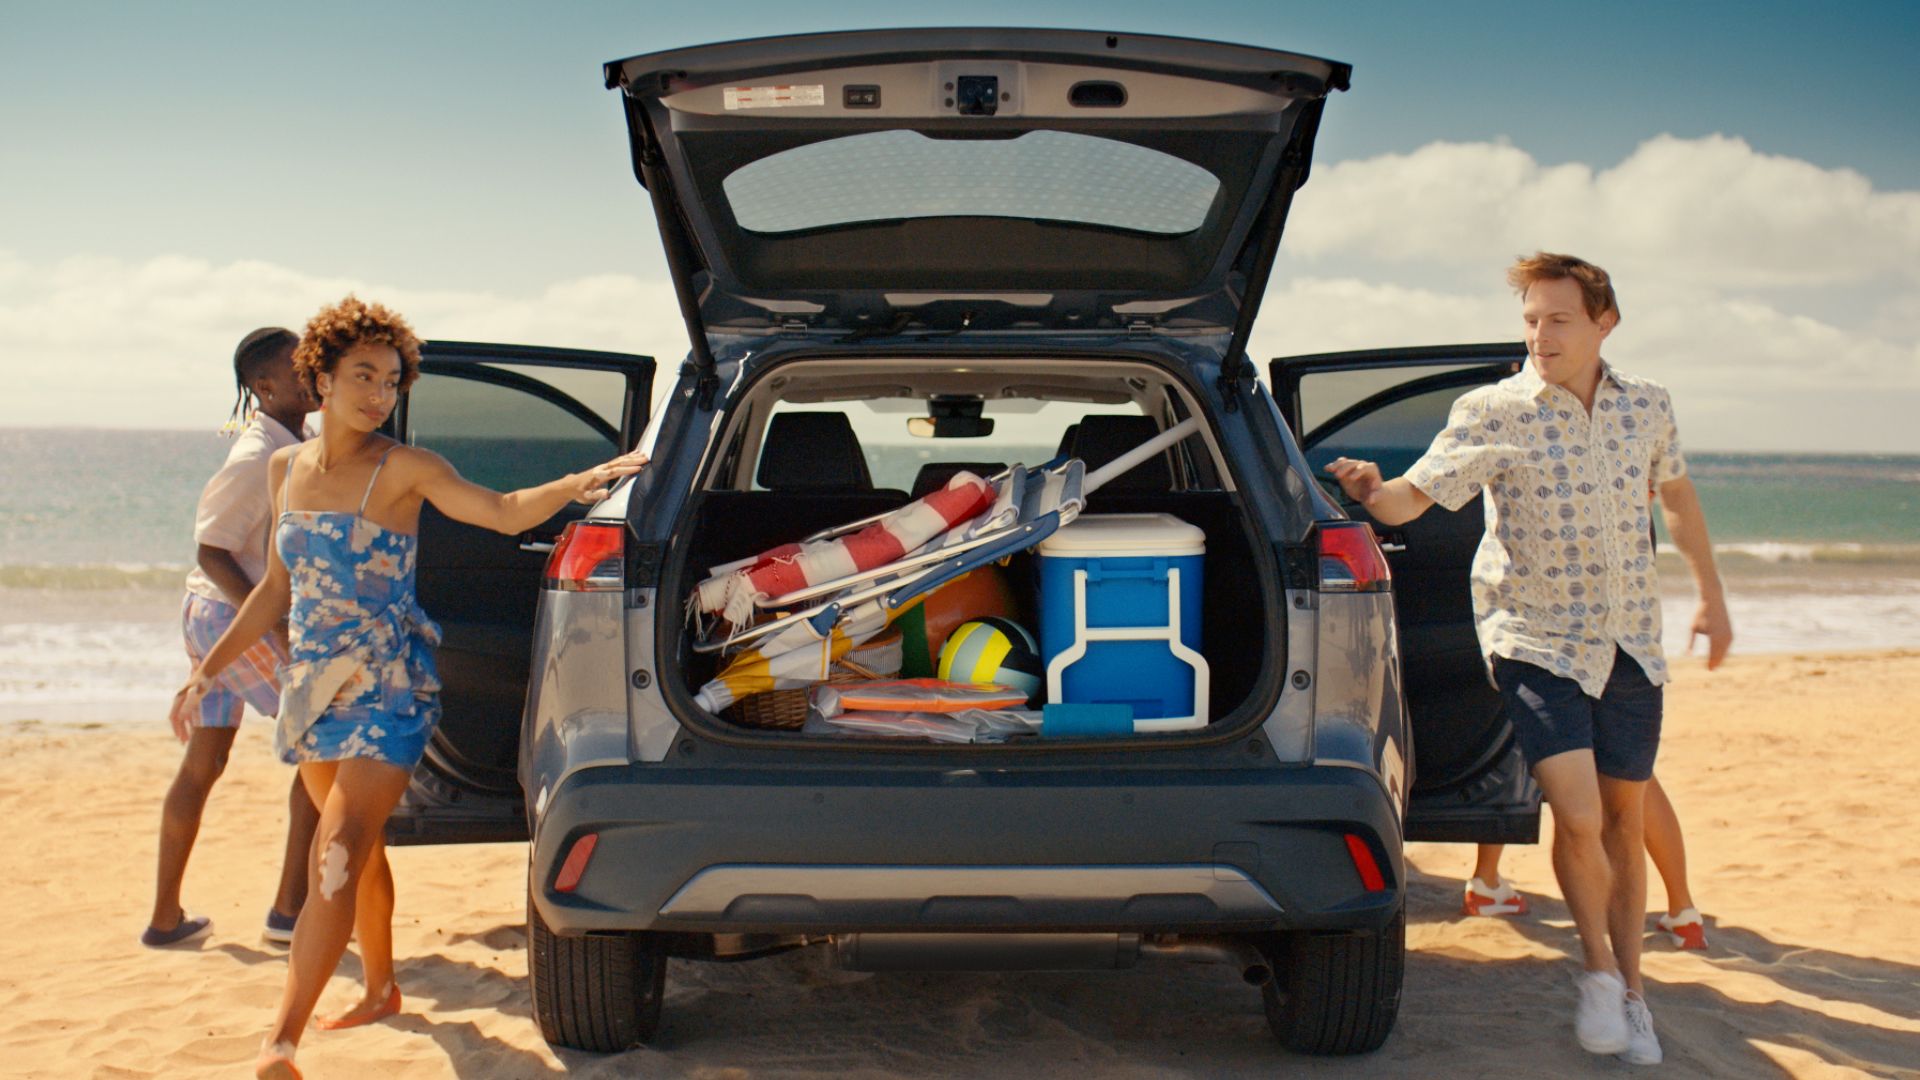 Family on beach grabbing gear from the back of a Toyota.